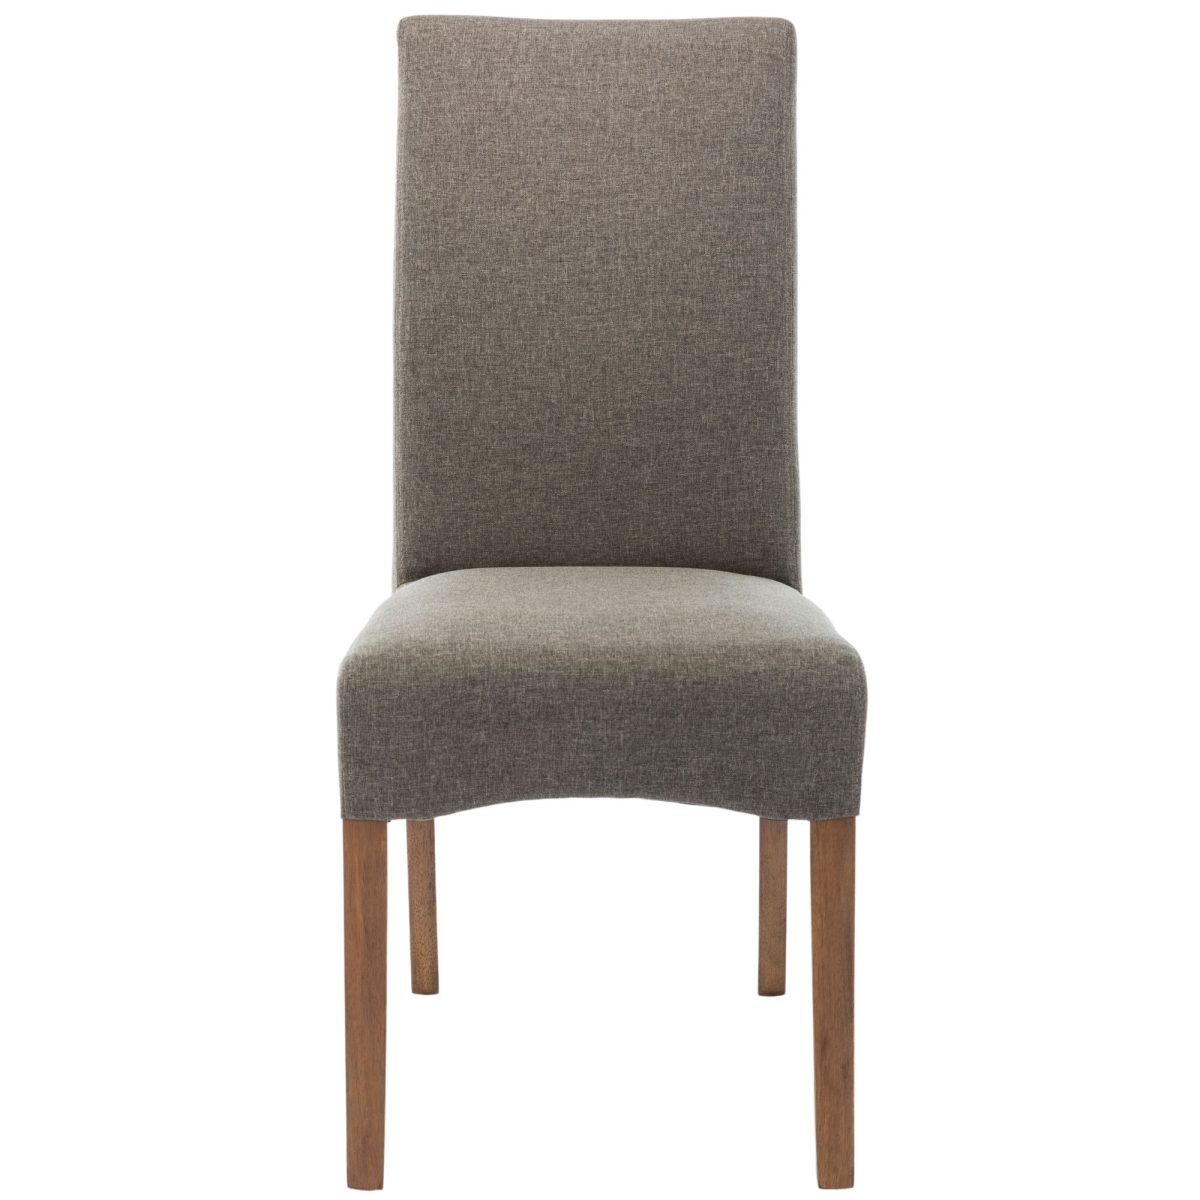 Aksa Fabric Upholstered Dining Chair Solid Pine Wood Furniture – Grey – 2